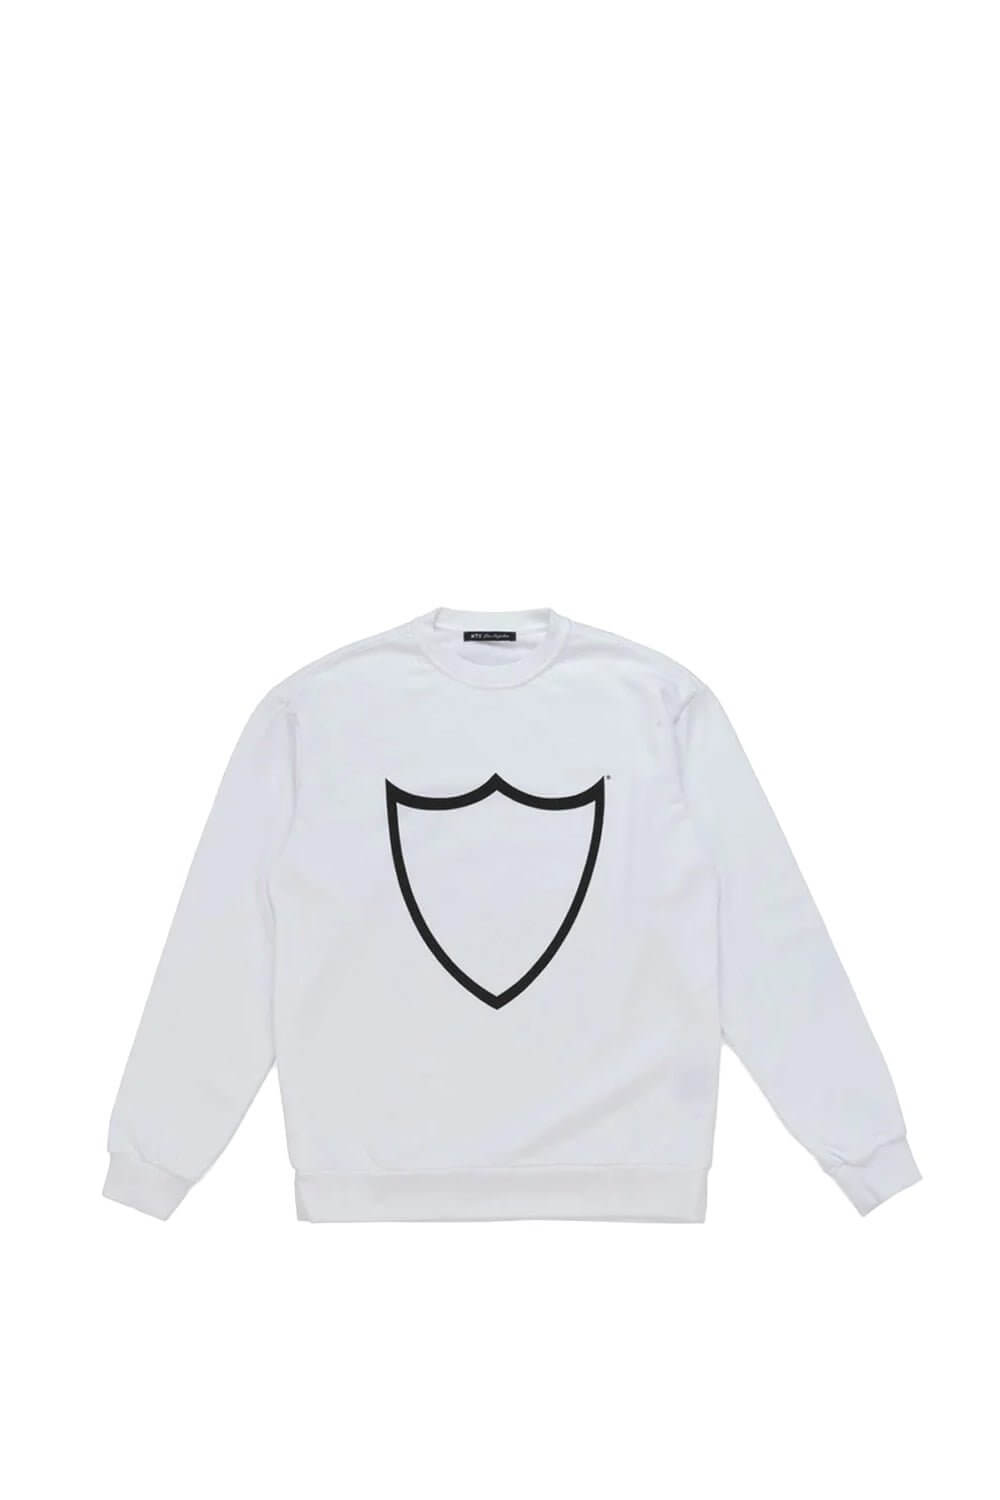 SHIELD SWEATER Round neck sweater with printed logo on the front. 100% cotton. Made in Italy. HTC LOS ANGELES